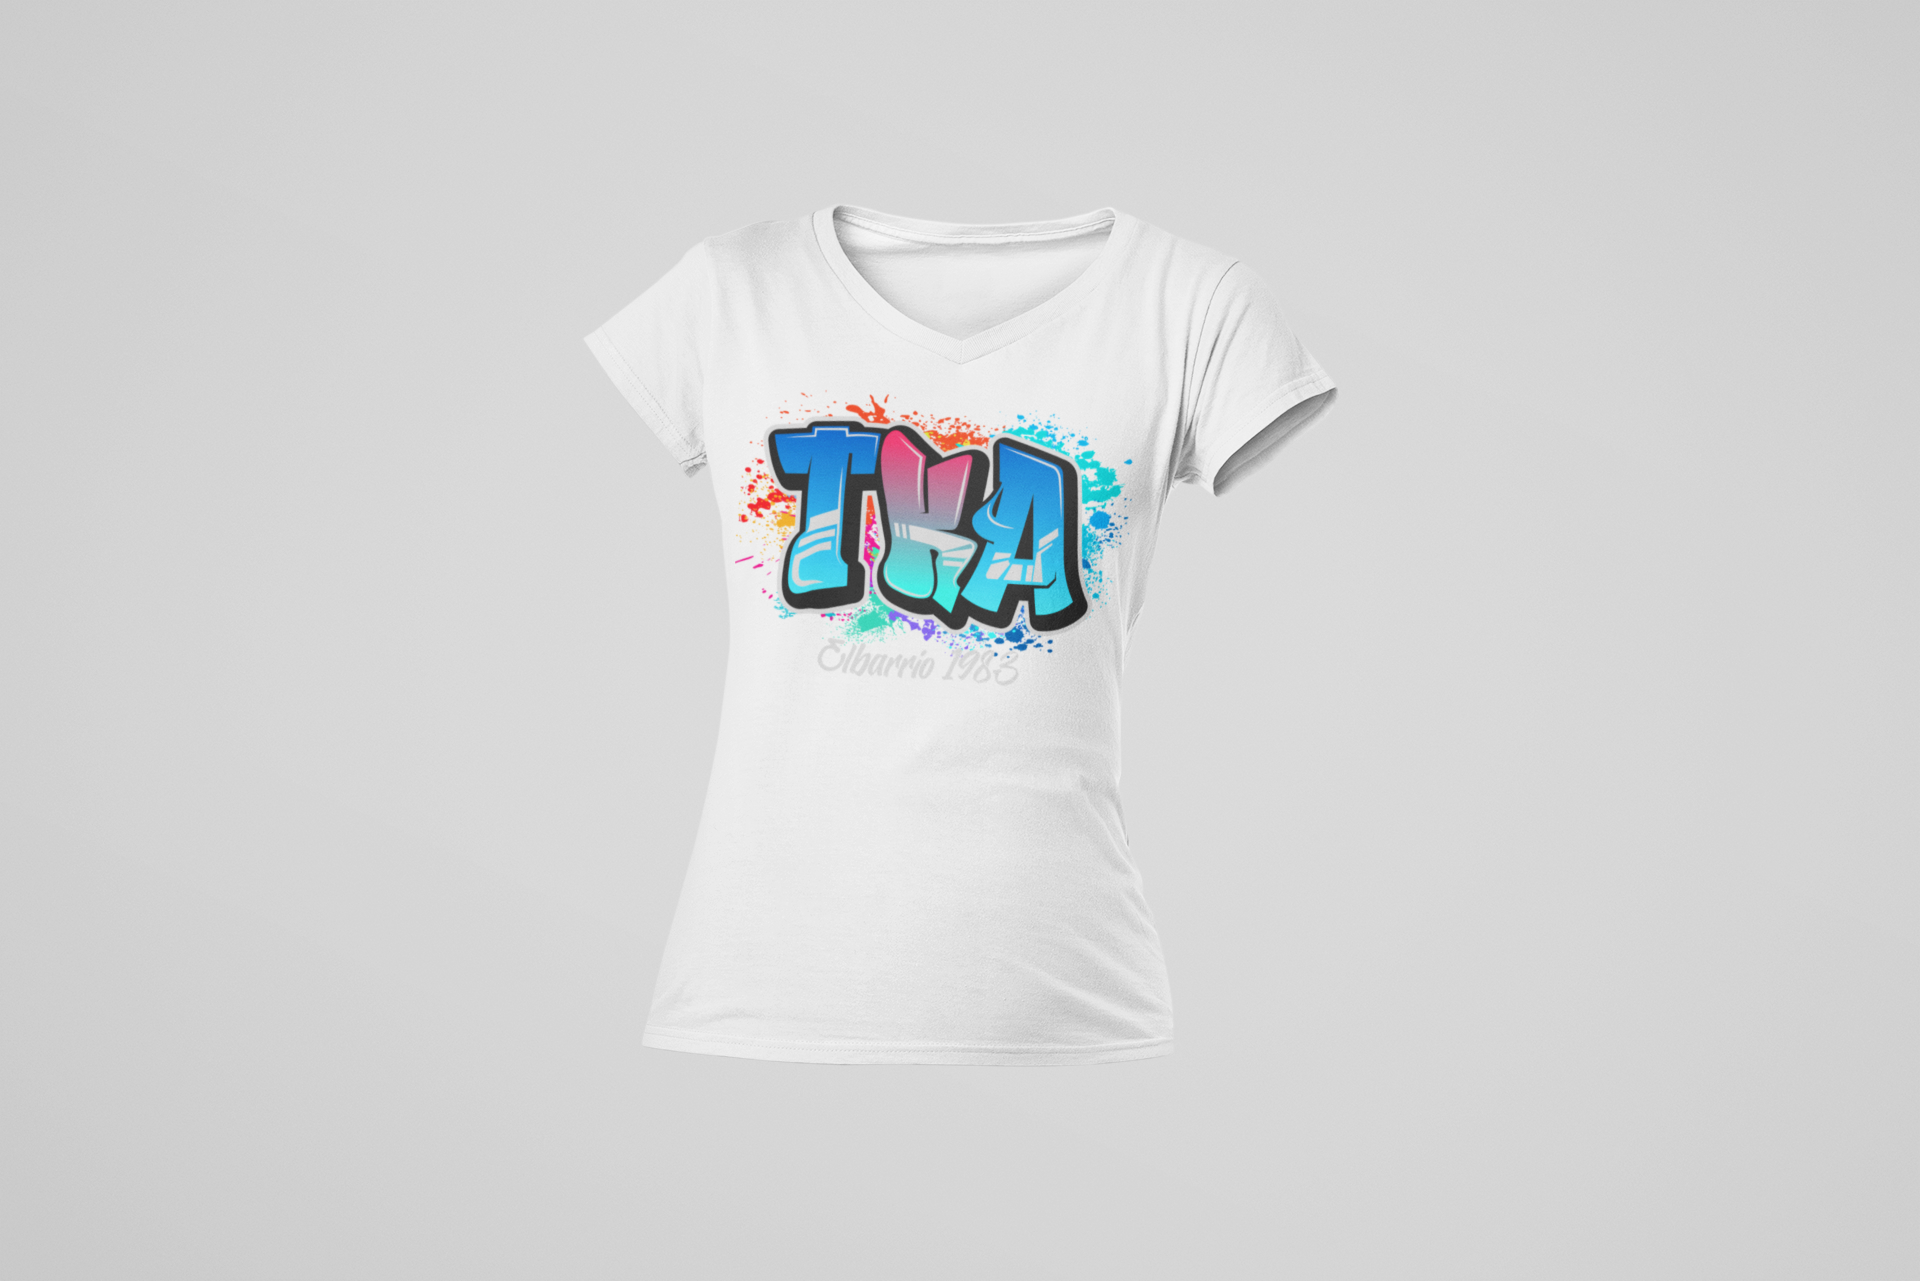 Brought to you by "TONY TKA” The Official T.K.A. logo Tee.